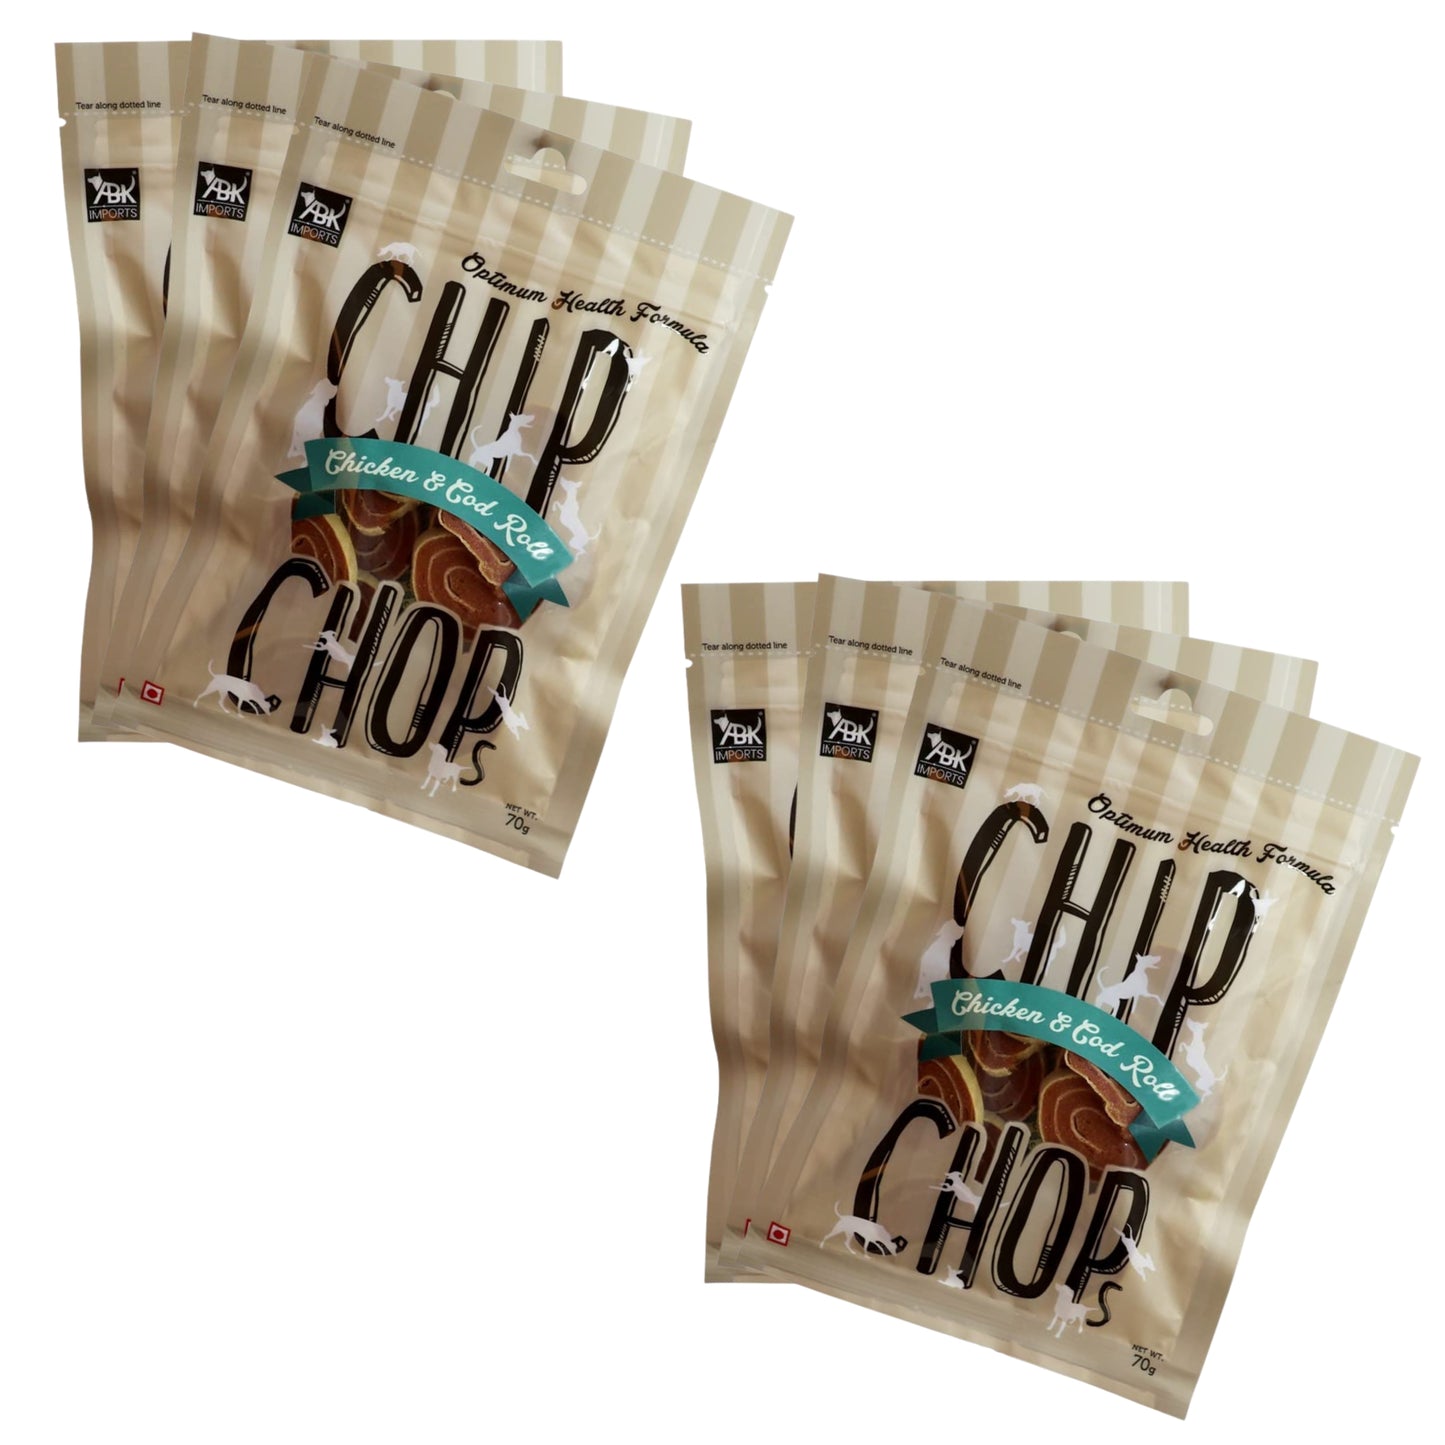 Chip Chops Dog Treats - Chicken & Codfish Roll (70gm, Pack of 6)